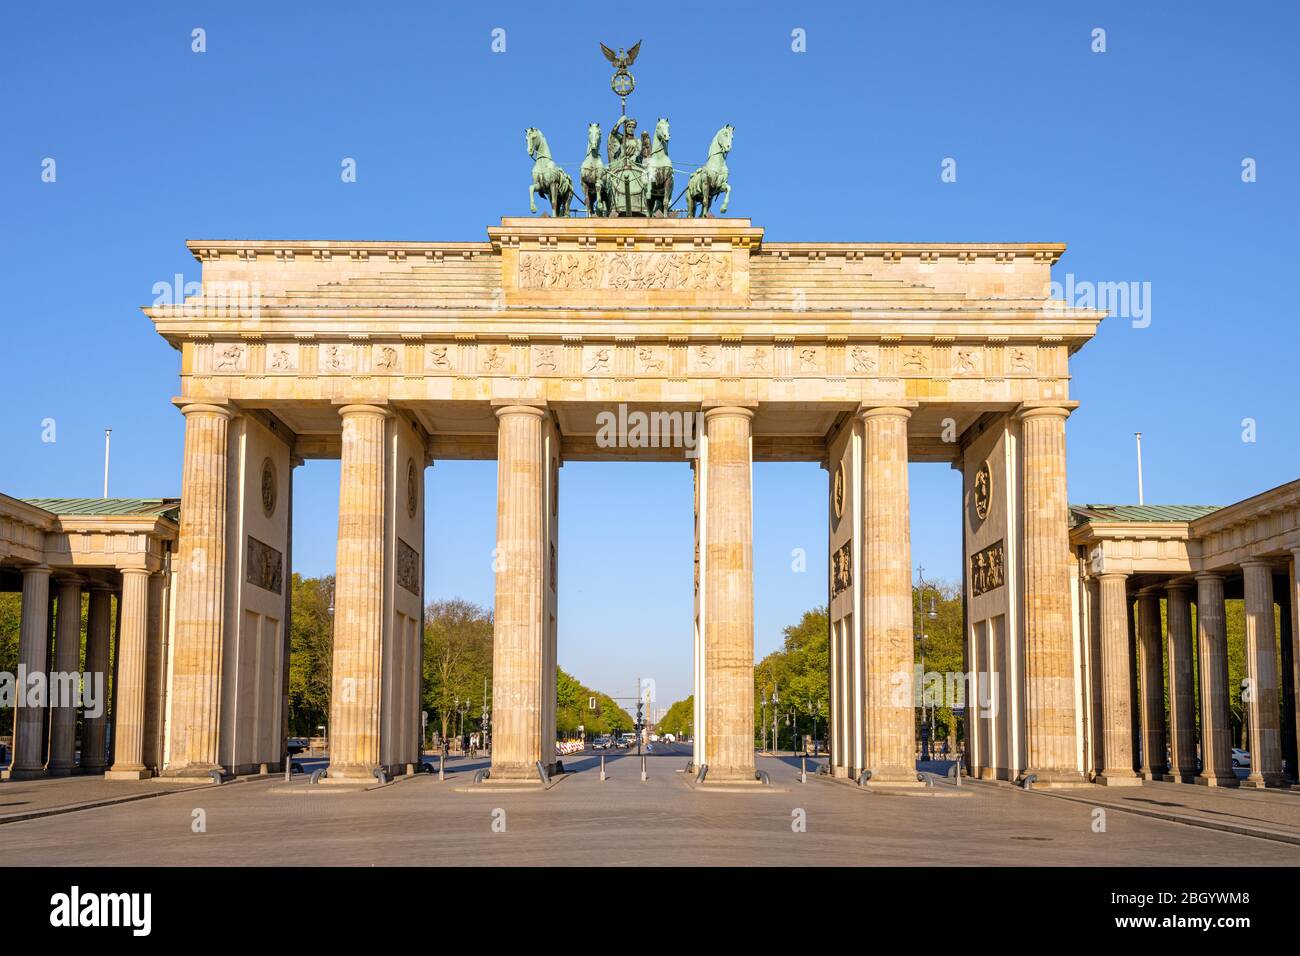 The famous Brandenburg Gate in Berlin early in the morning with no people Stock Photo